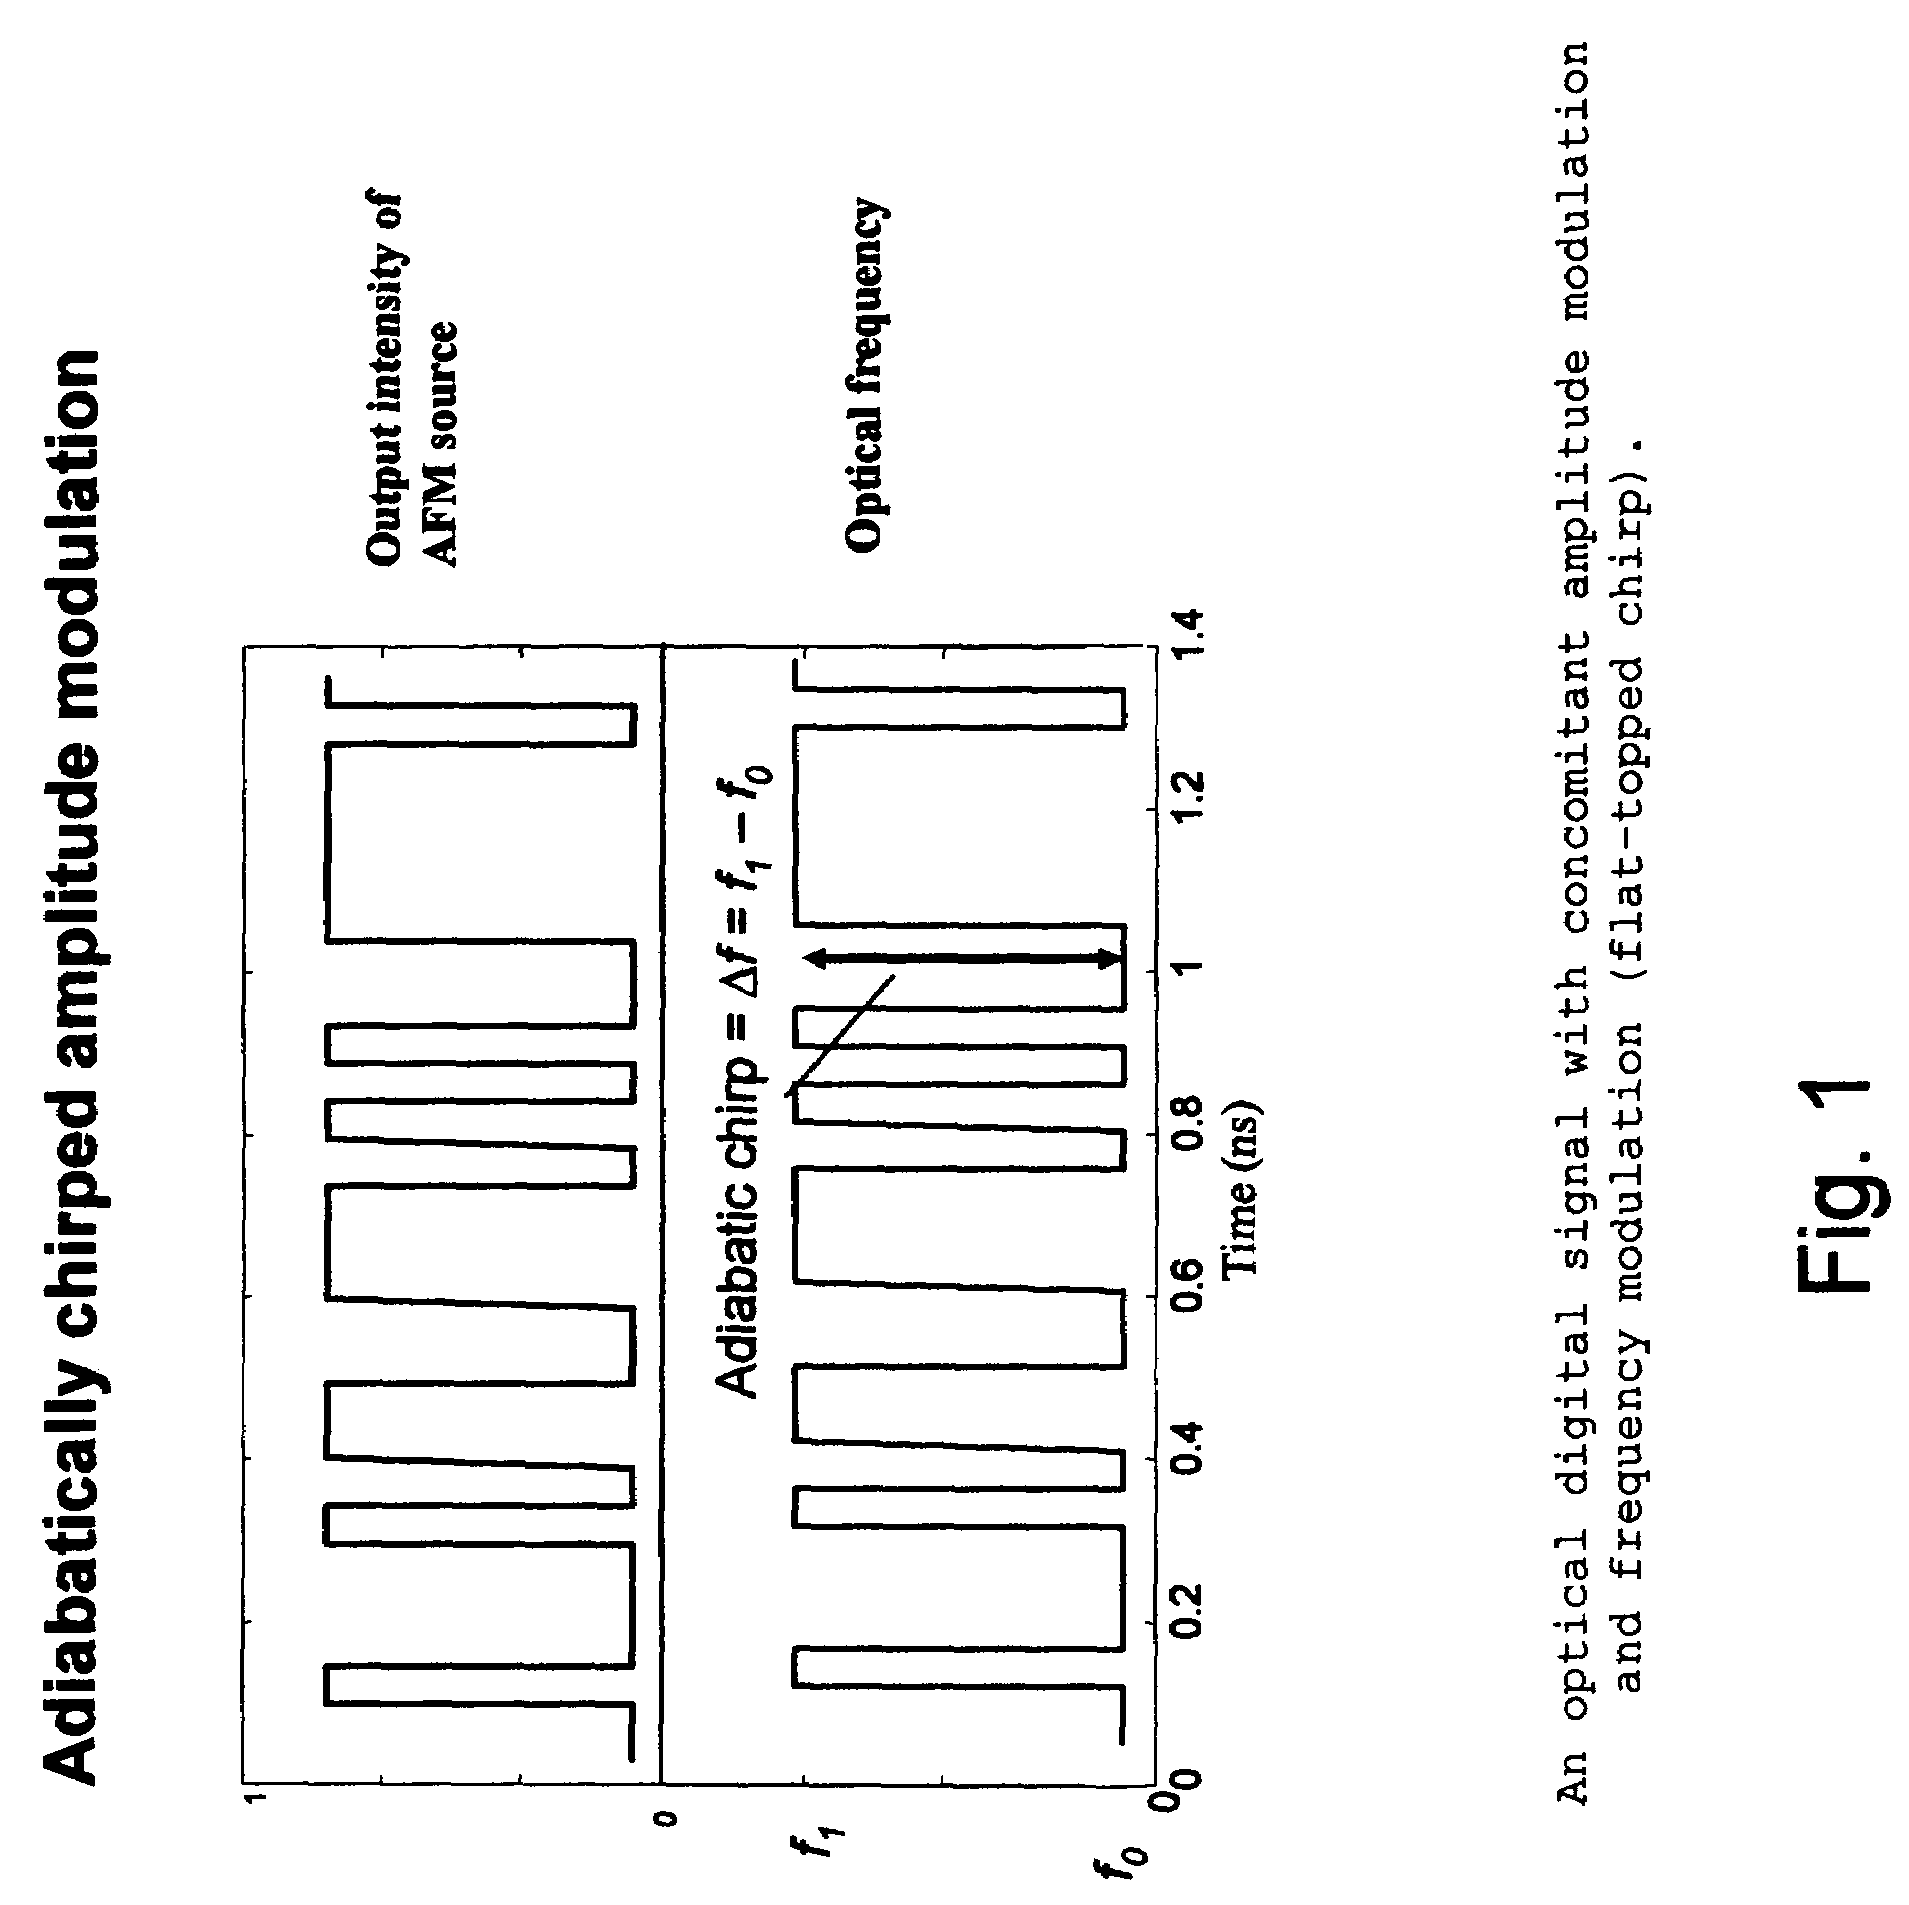 Optical system comprising an FM source and a spectral reshaping element